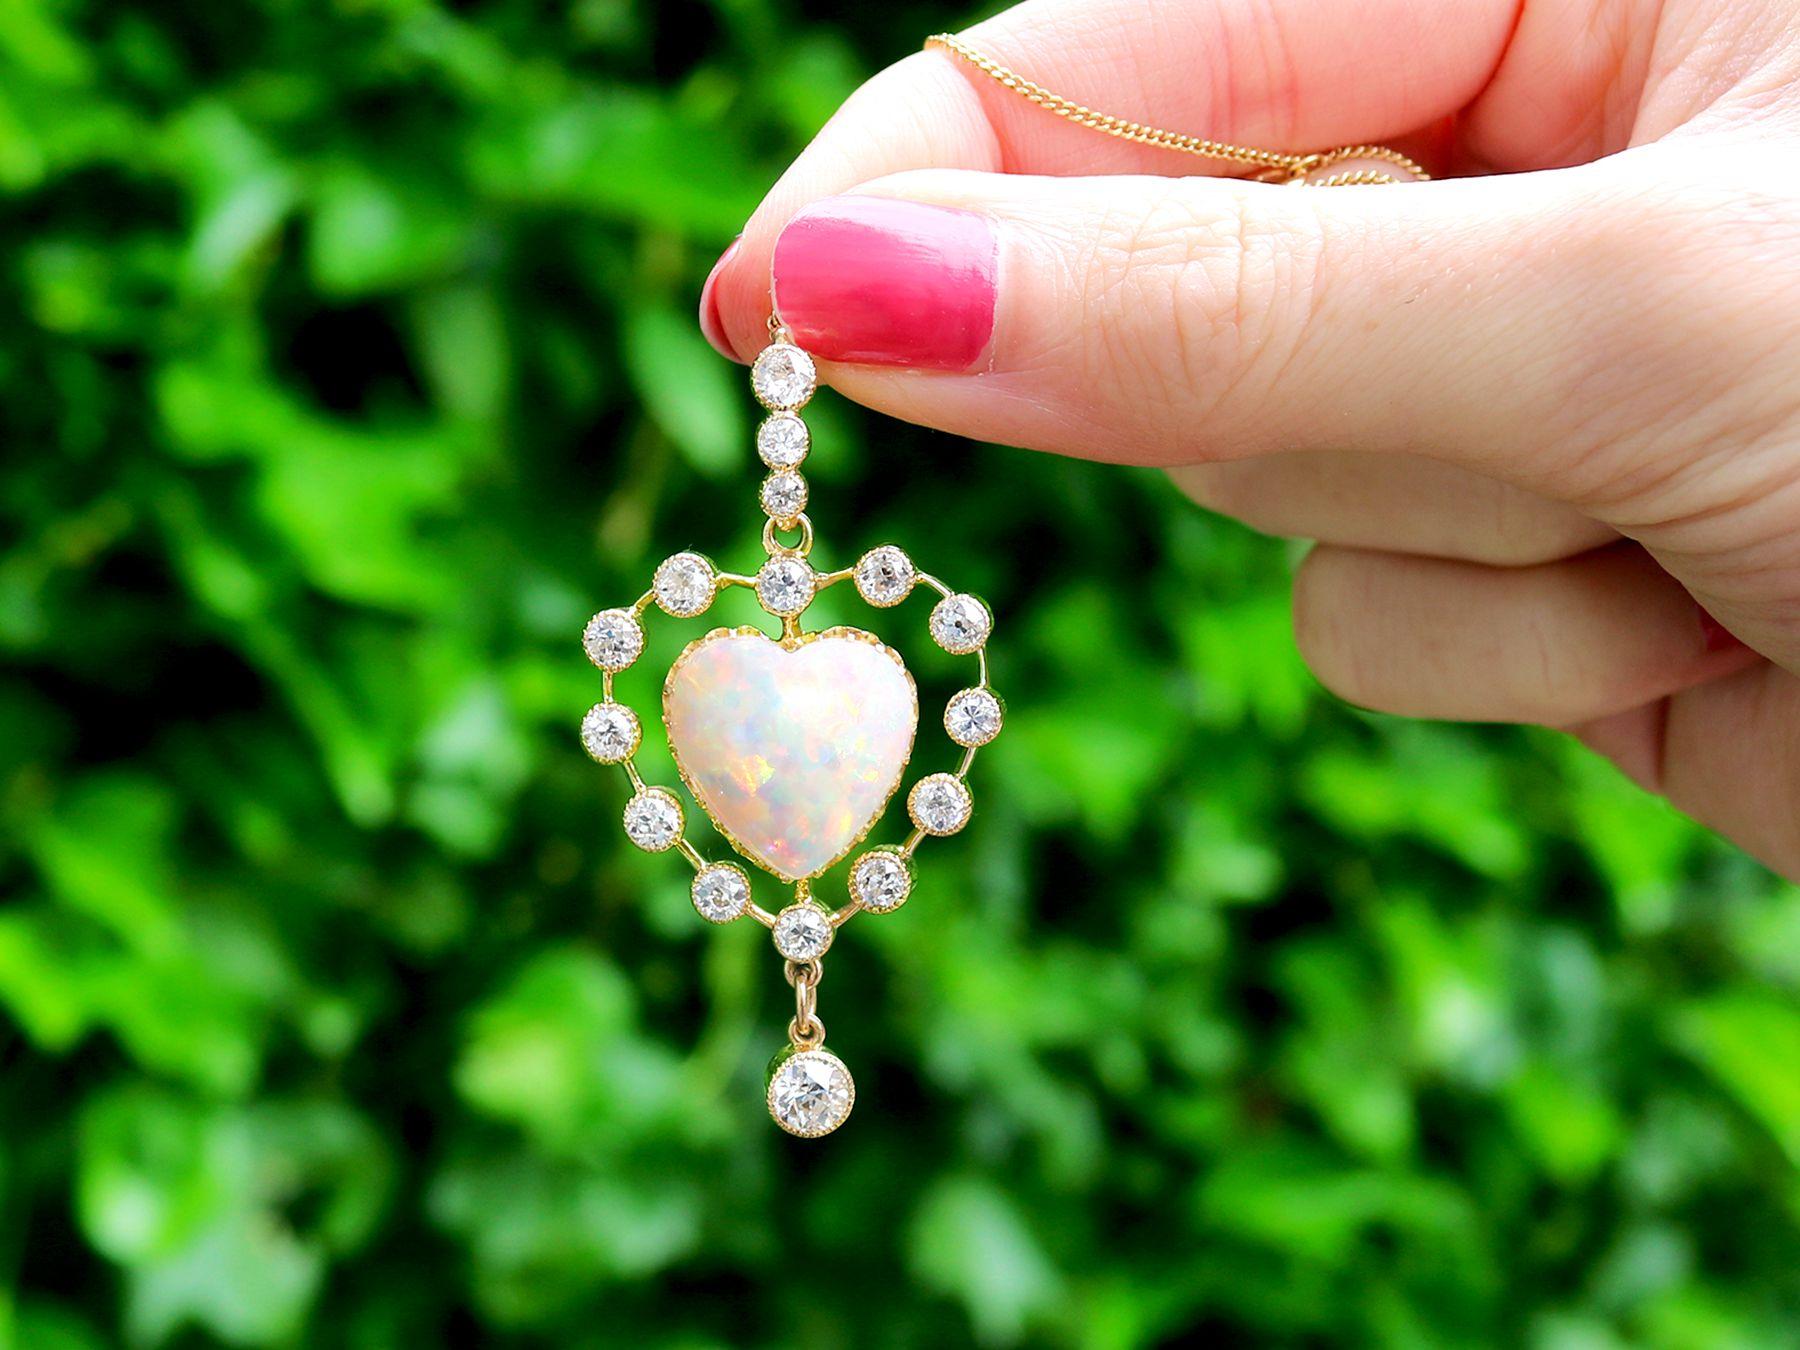 A magnificent, stunning, fine and impressive antique 5.48 carat opal and 2.91 carat diamond, 15 karat yellow gold heart pendant; part of our diverse antique jewellery and estate jewelry collections.

This magnificent, fine and impressive antique